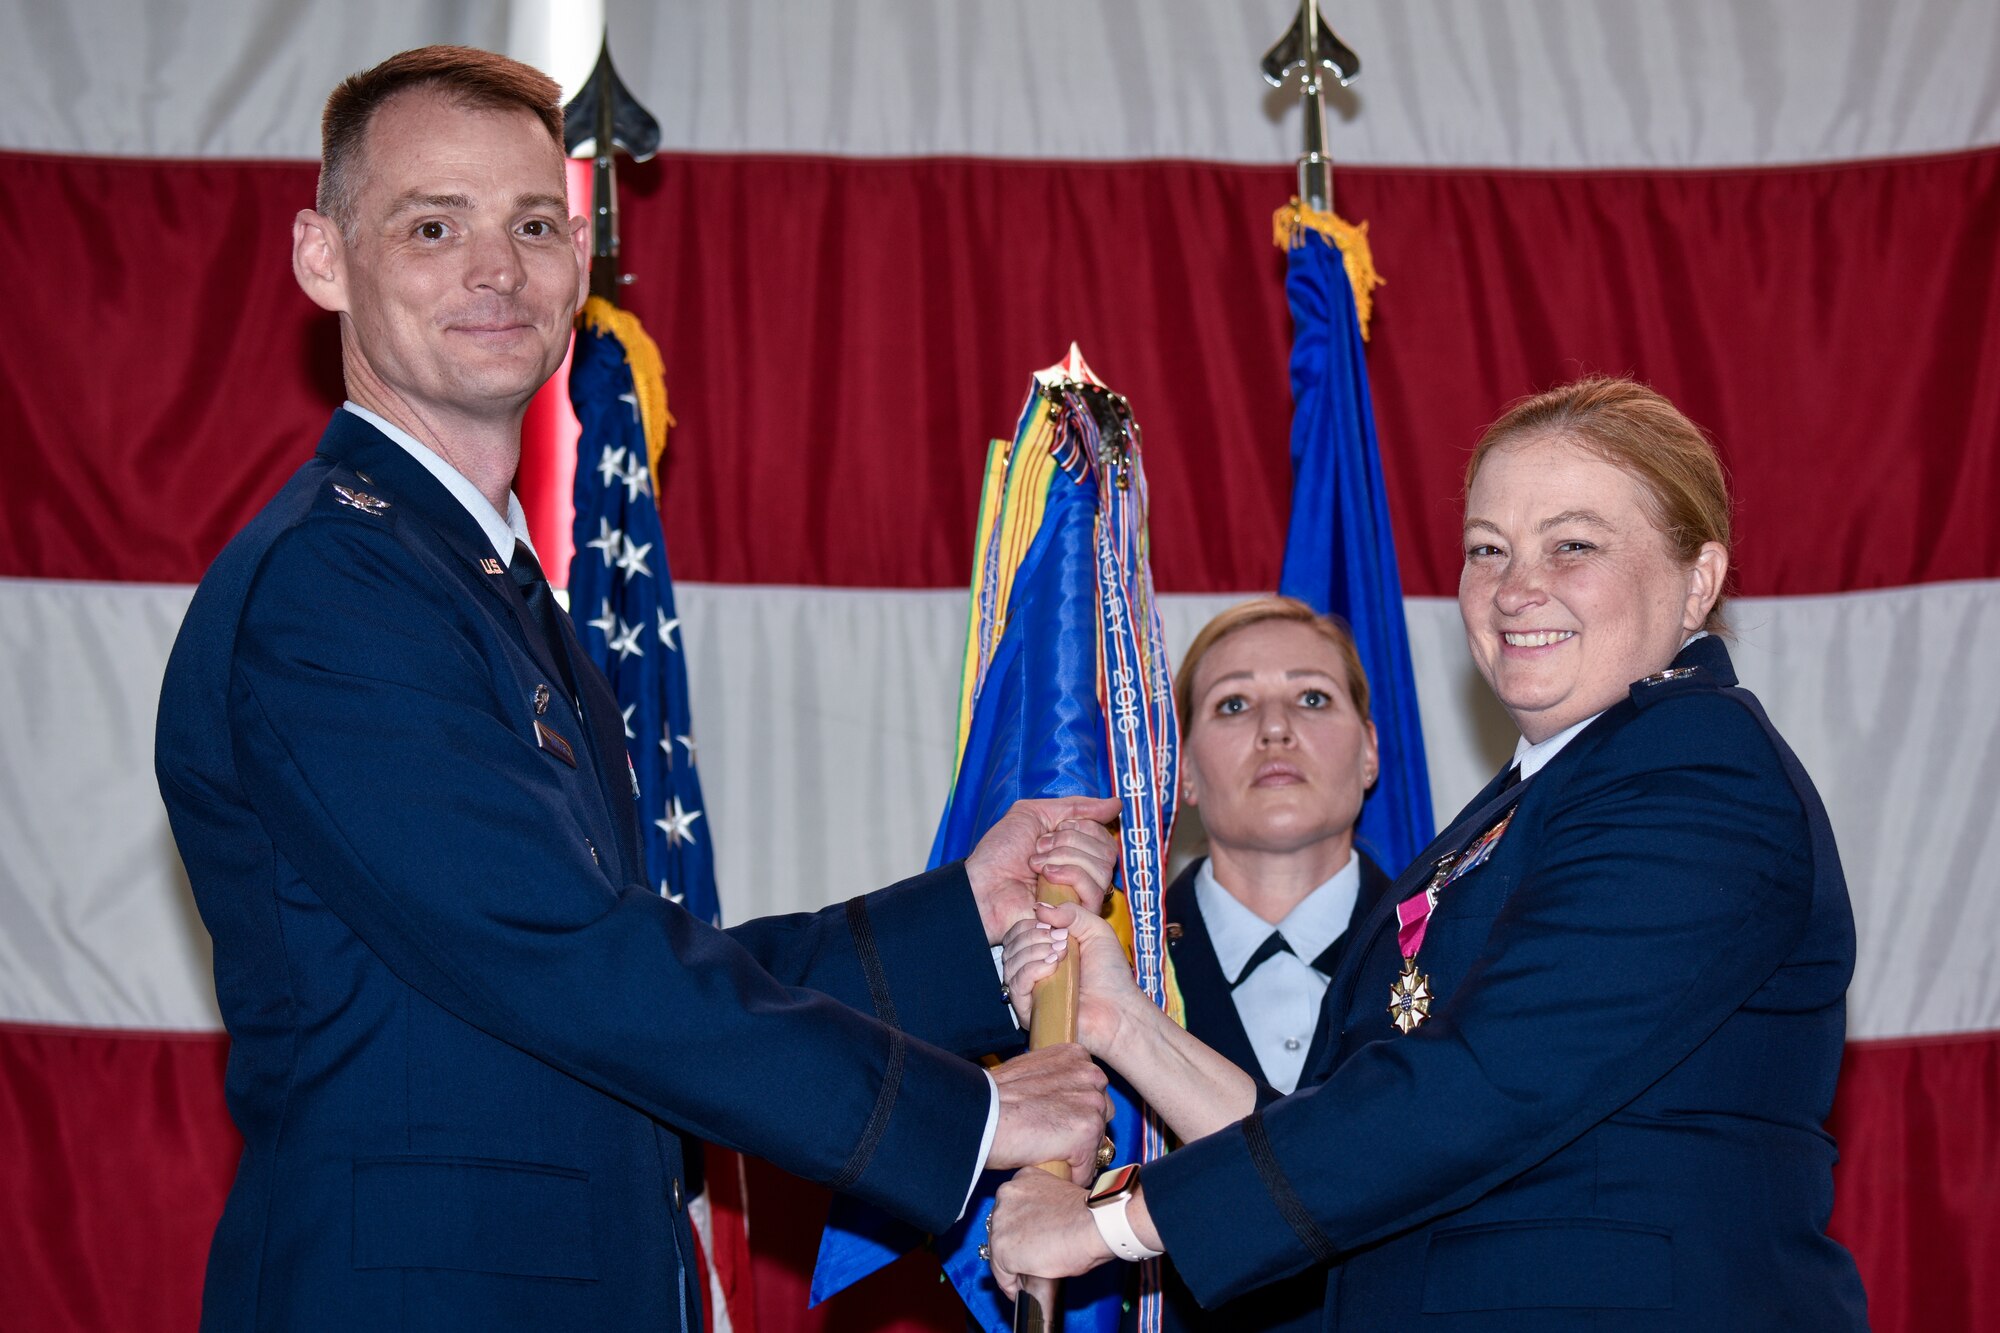 U.S. Air Force Col. Mary Stewart (right), outgoing 377th Medical Group commander, passes the guidon to Col. David Miller, 377th Air Base Wing commander in a change of command ceremony at Kirtland Air Force Base, N.M., June 27, 2019. Stewart leaves Team Kirtland to support Joint Base San Antonio-Lackland, Texas, as the 59th Medical Support Group commander. (U.S. Air Force photo by Airman 1st Class Austin J. Prisbrey)